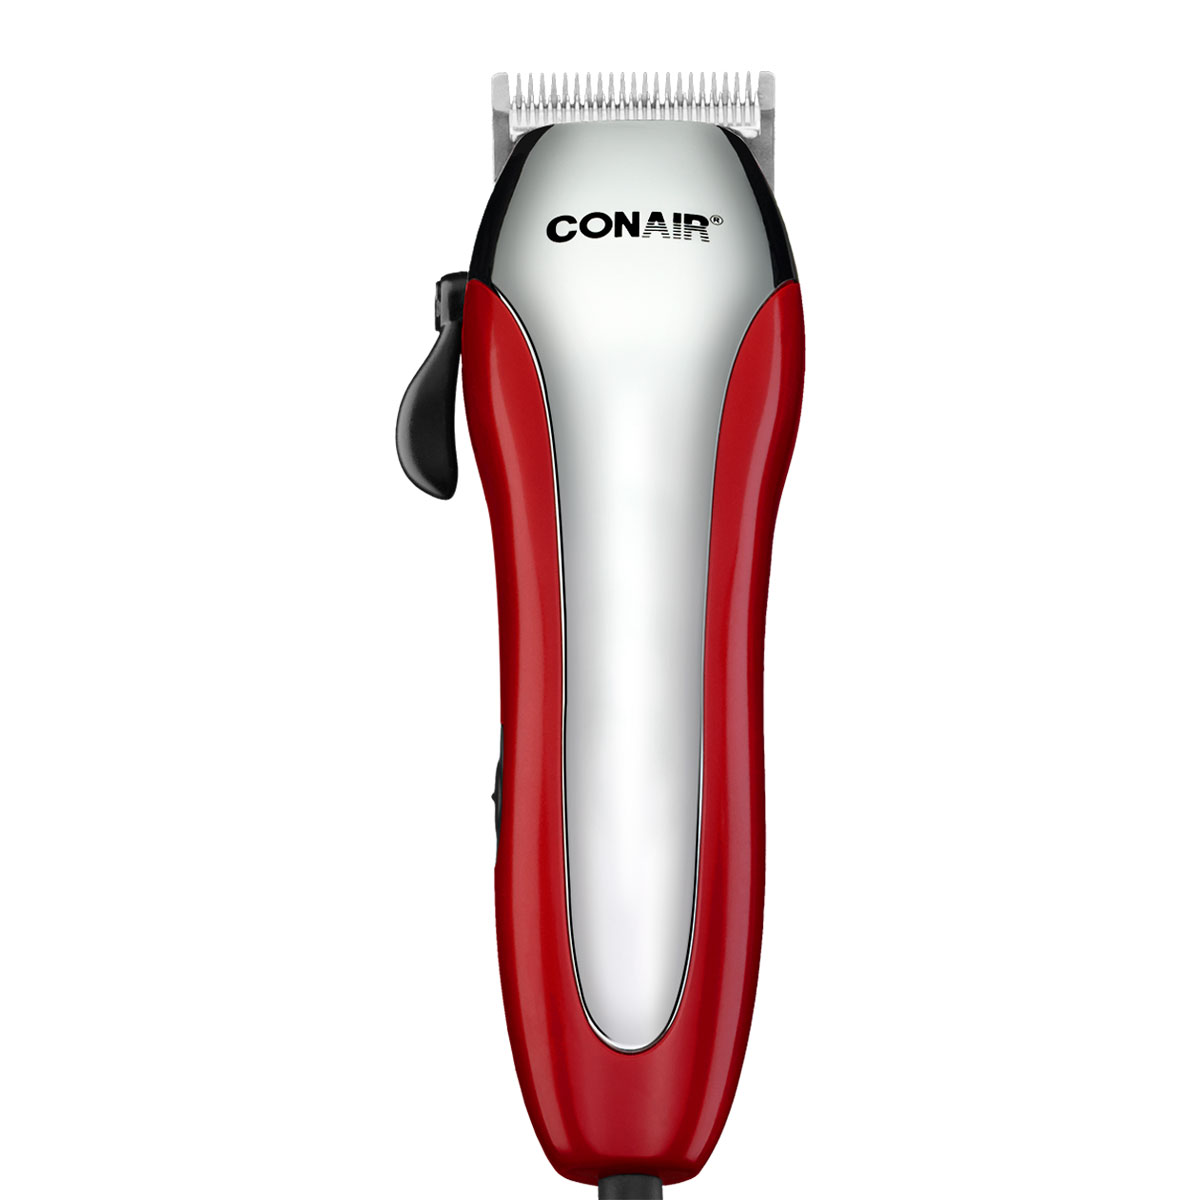 Conair 23 Piece Corded Hair Cutting Clipper Trimmer Set with 10 Guides